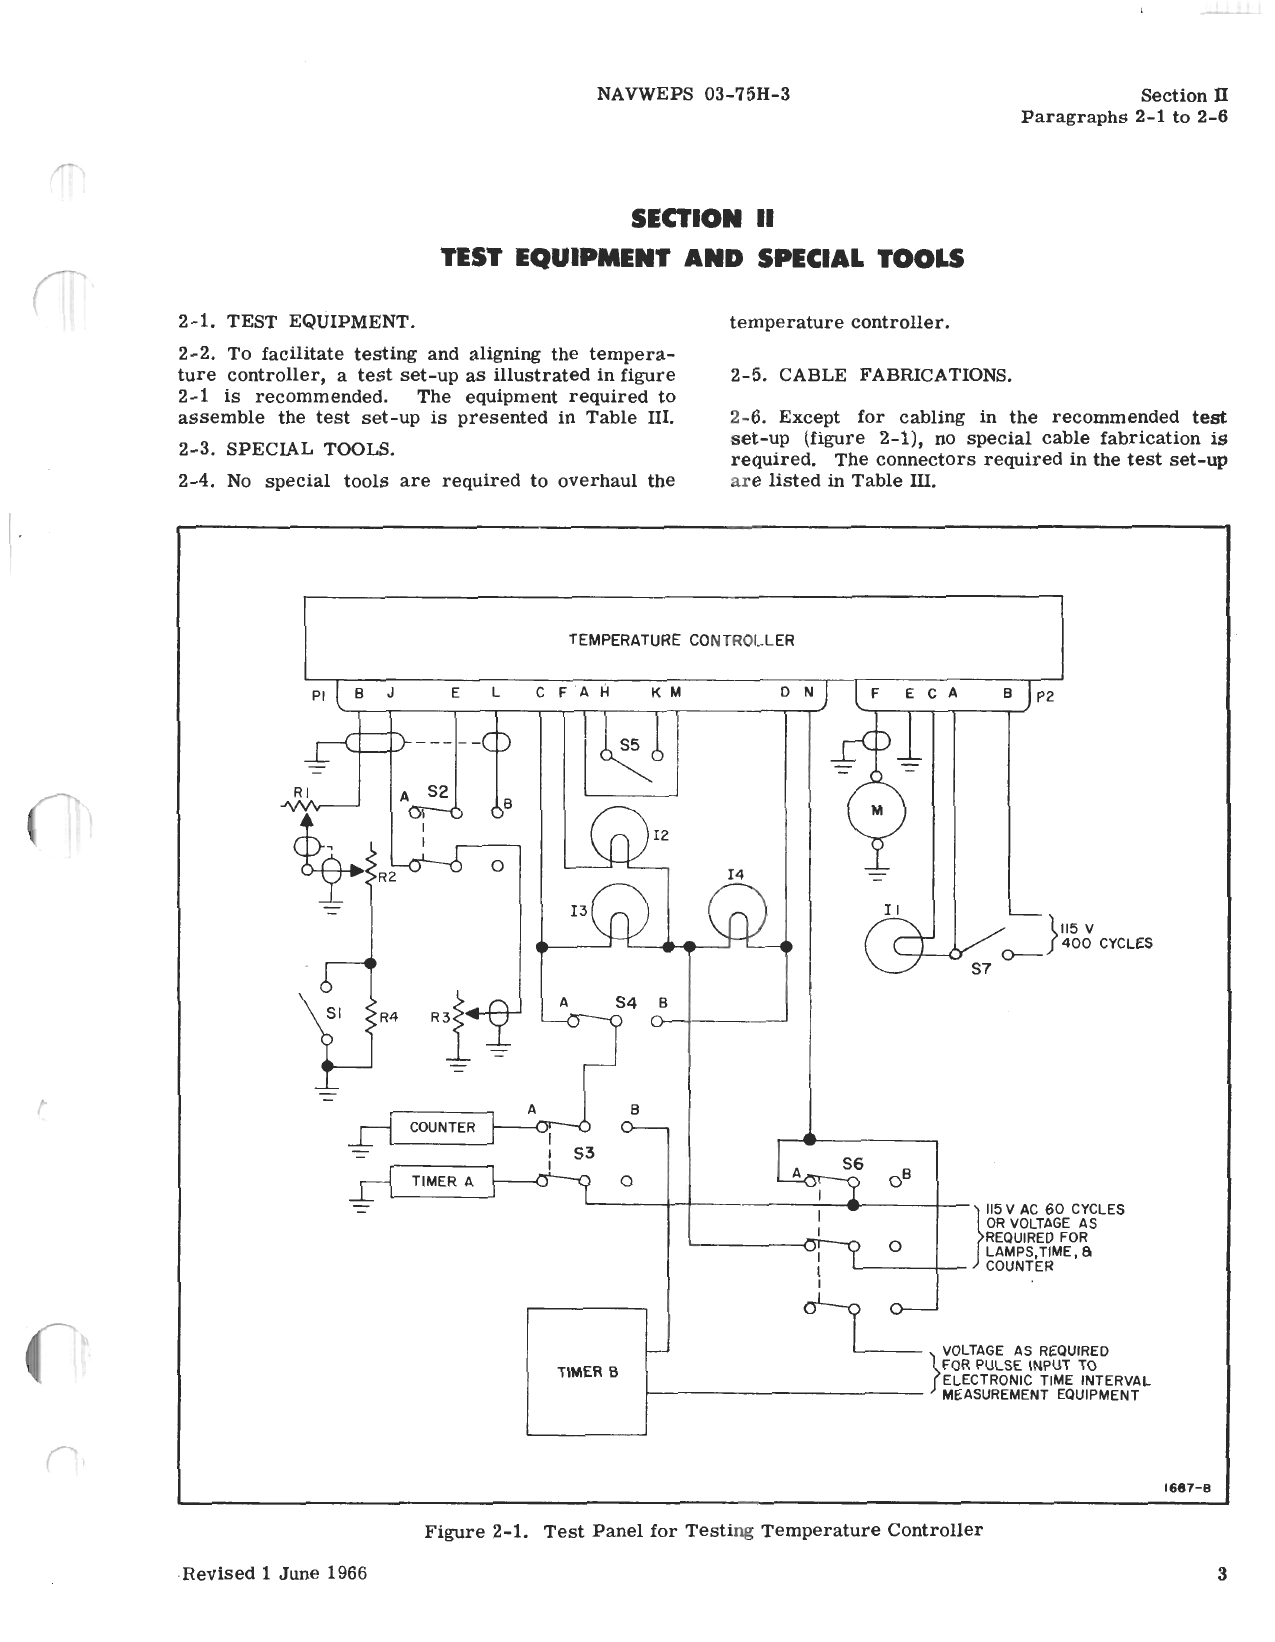 Sample page 7 from AirCorps Library document: Overhaul Instructions for Temperature Controller - Parts 25730028-03 and 25730028-04 